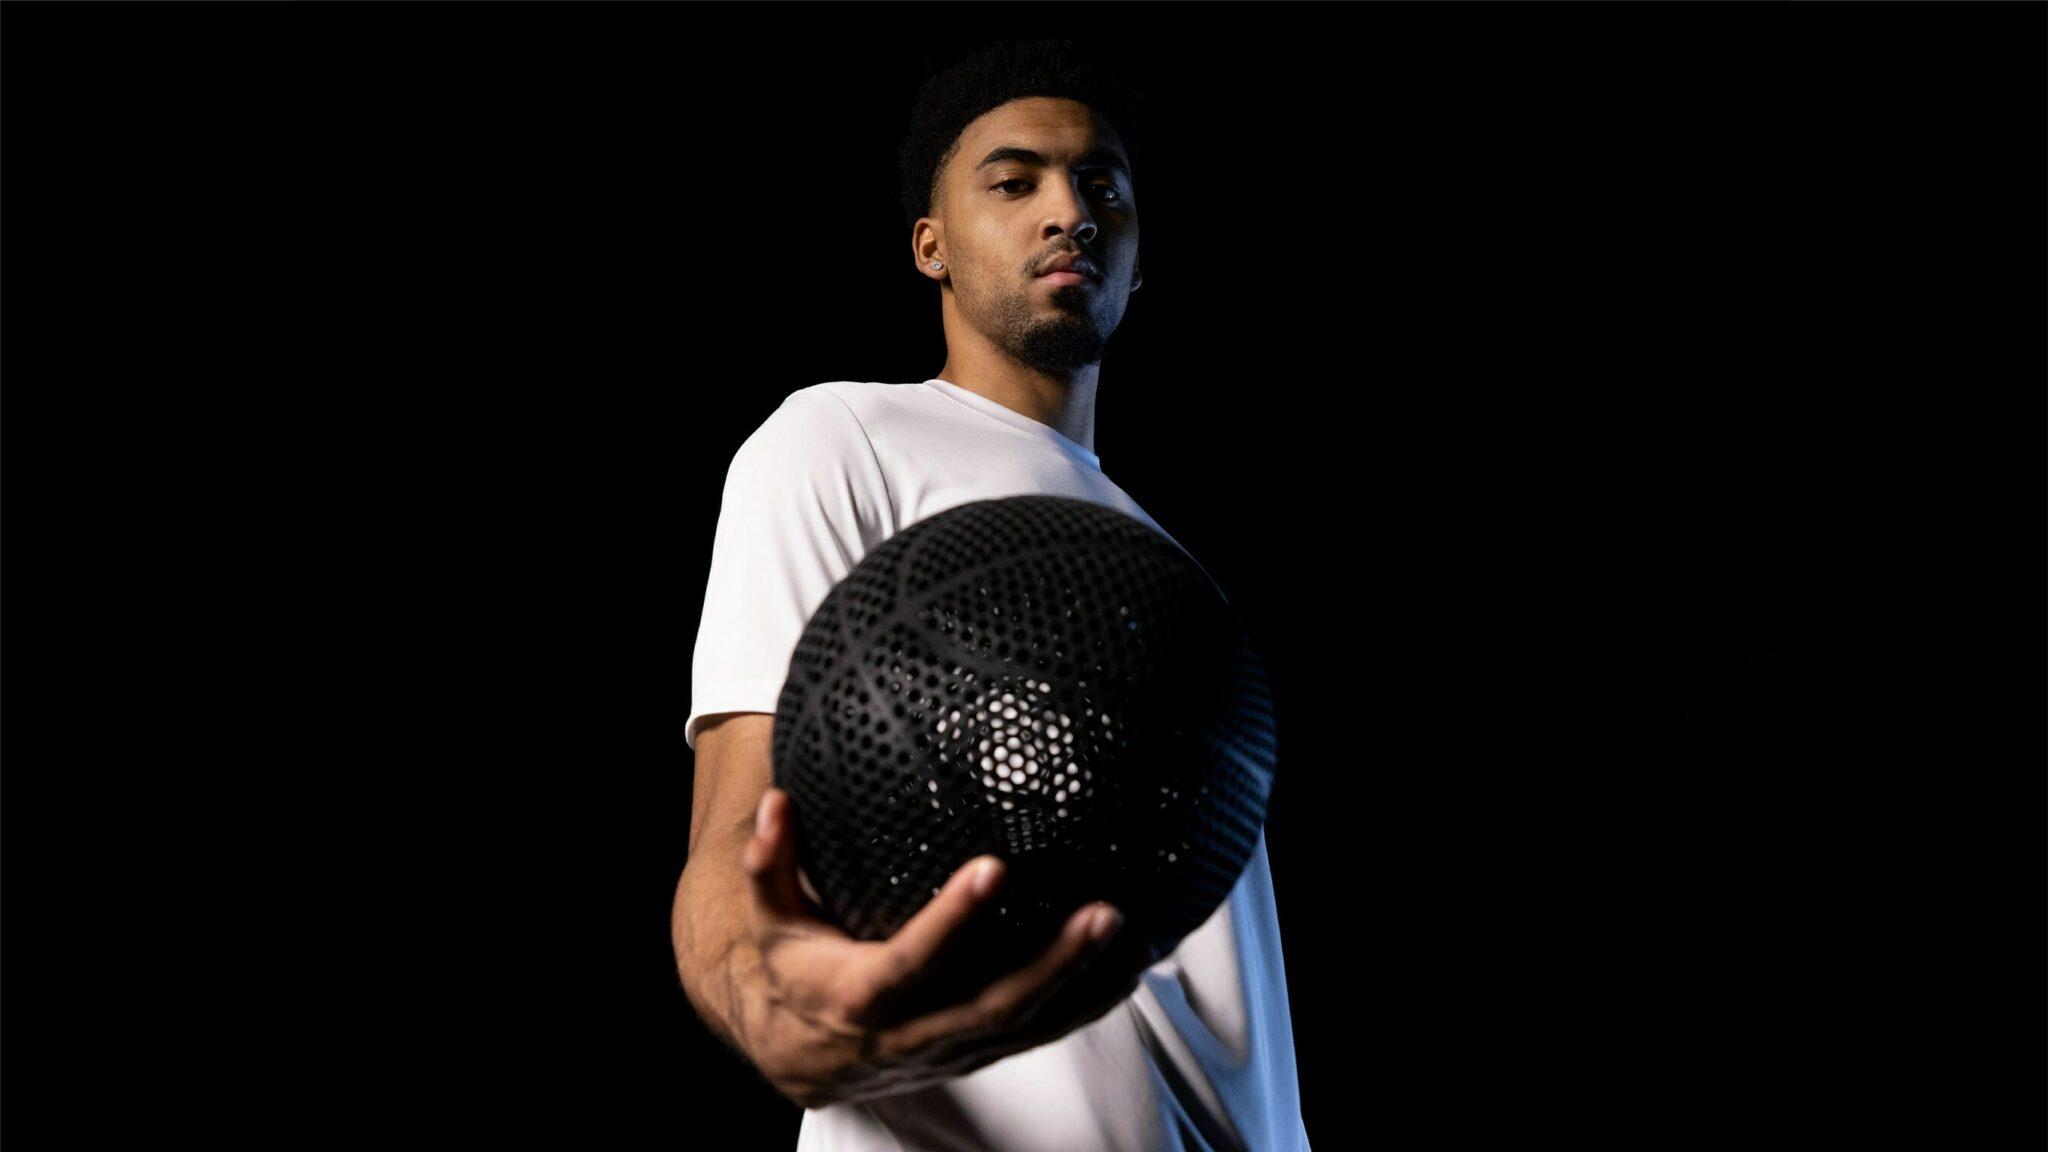 The 3D Printed airless basketball from Wilson makes Basketball the 16th